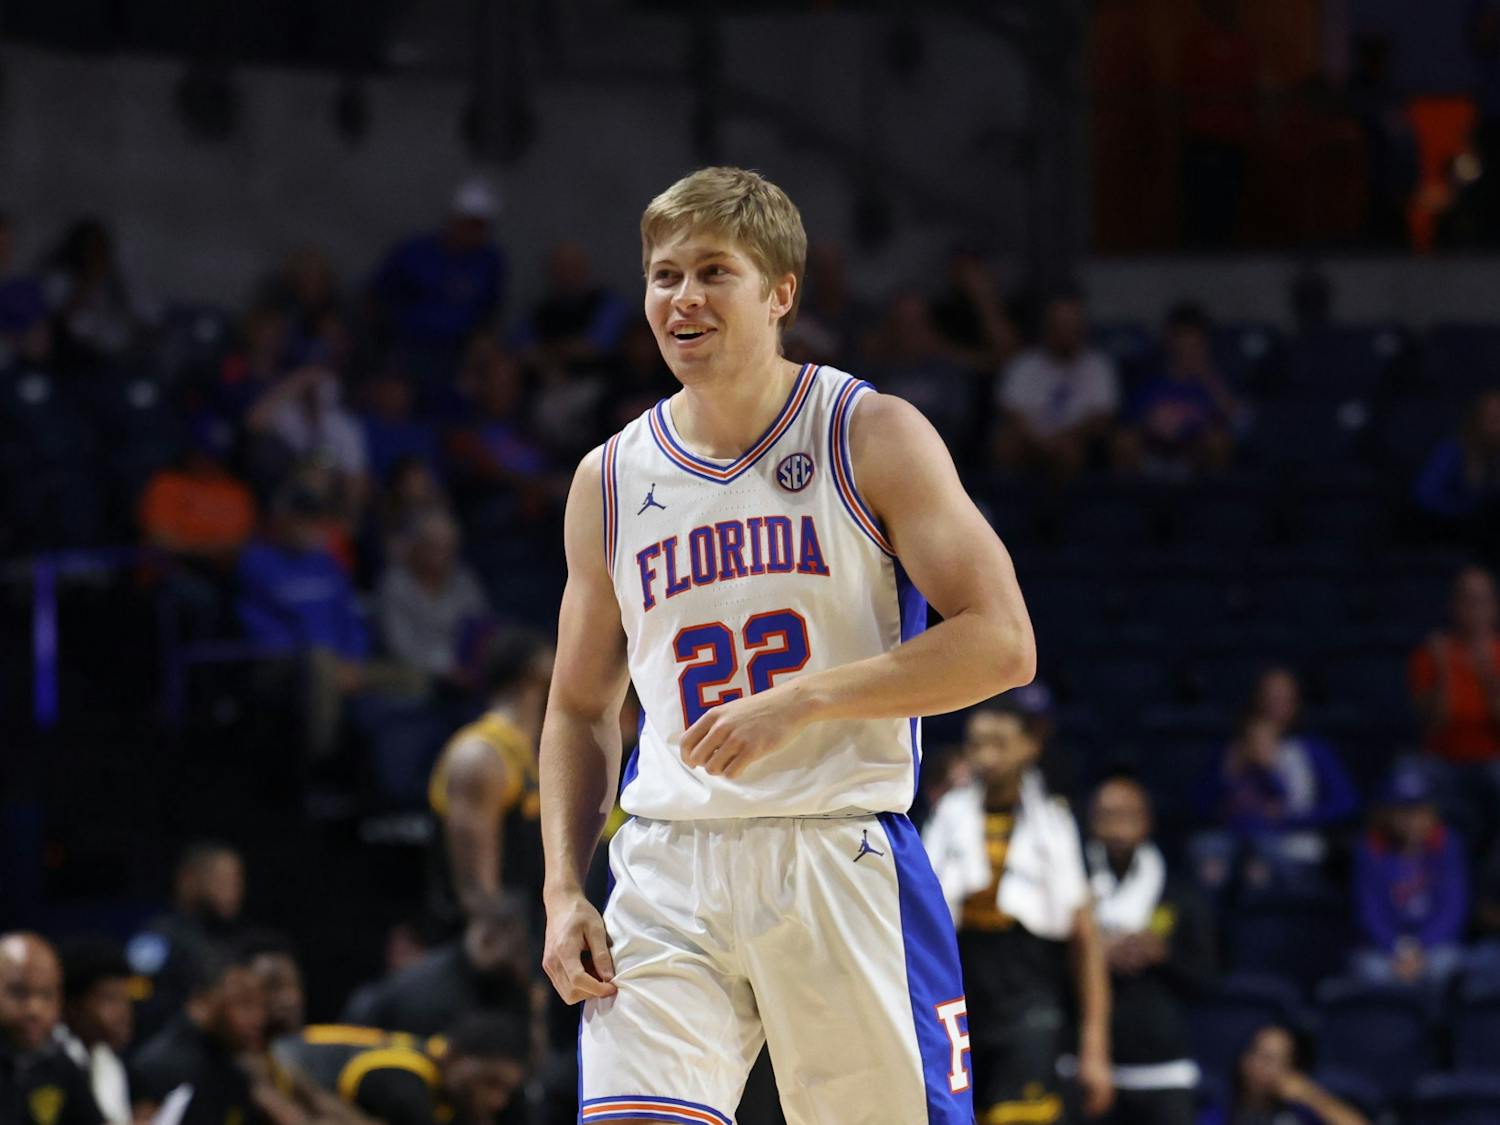 Senior guard Bennett Andersen smiles on the court in the Gators’ 96-57 win against the Grambling State Tigers on Dec. 22, 2023.